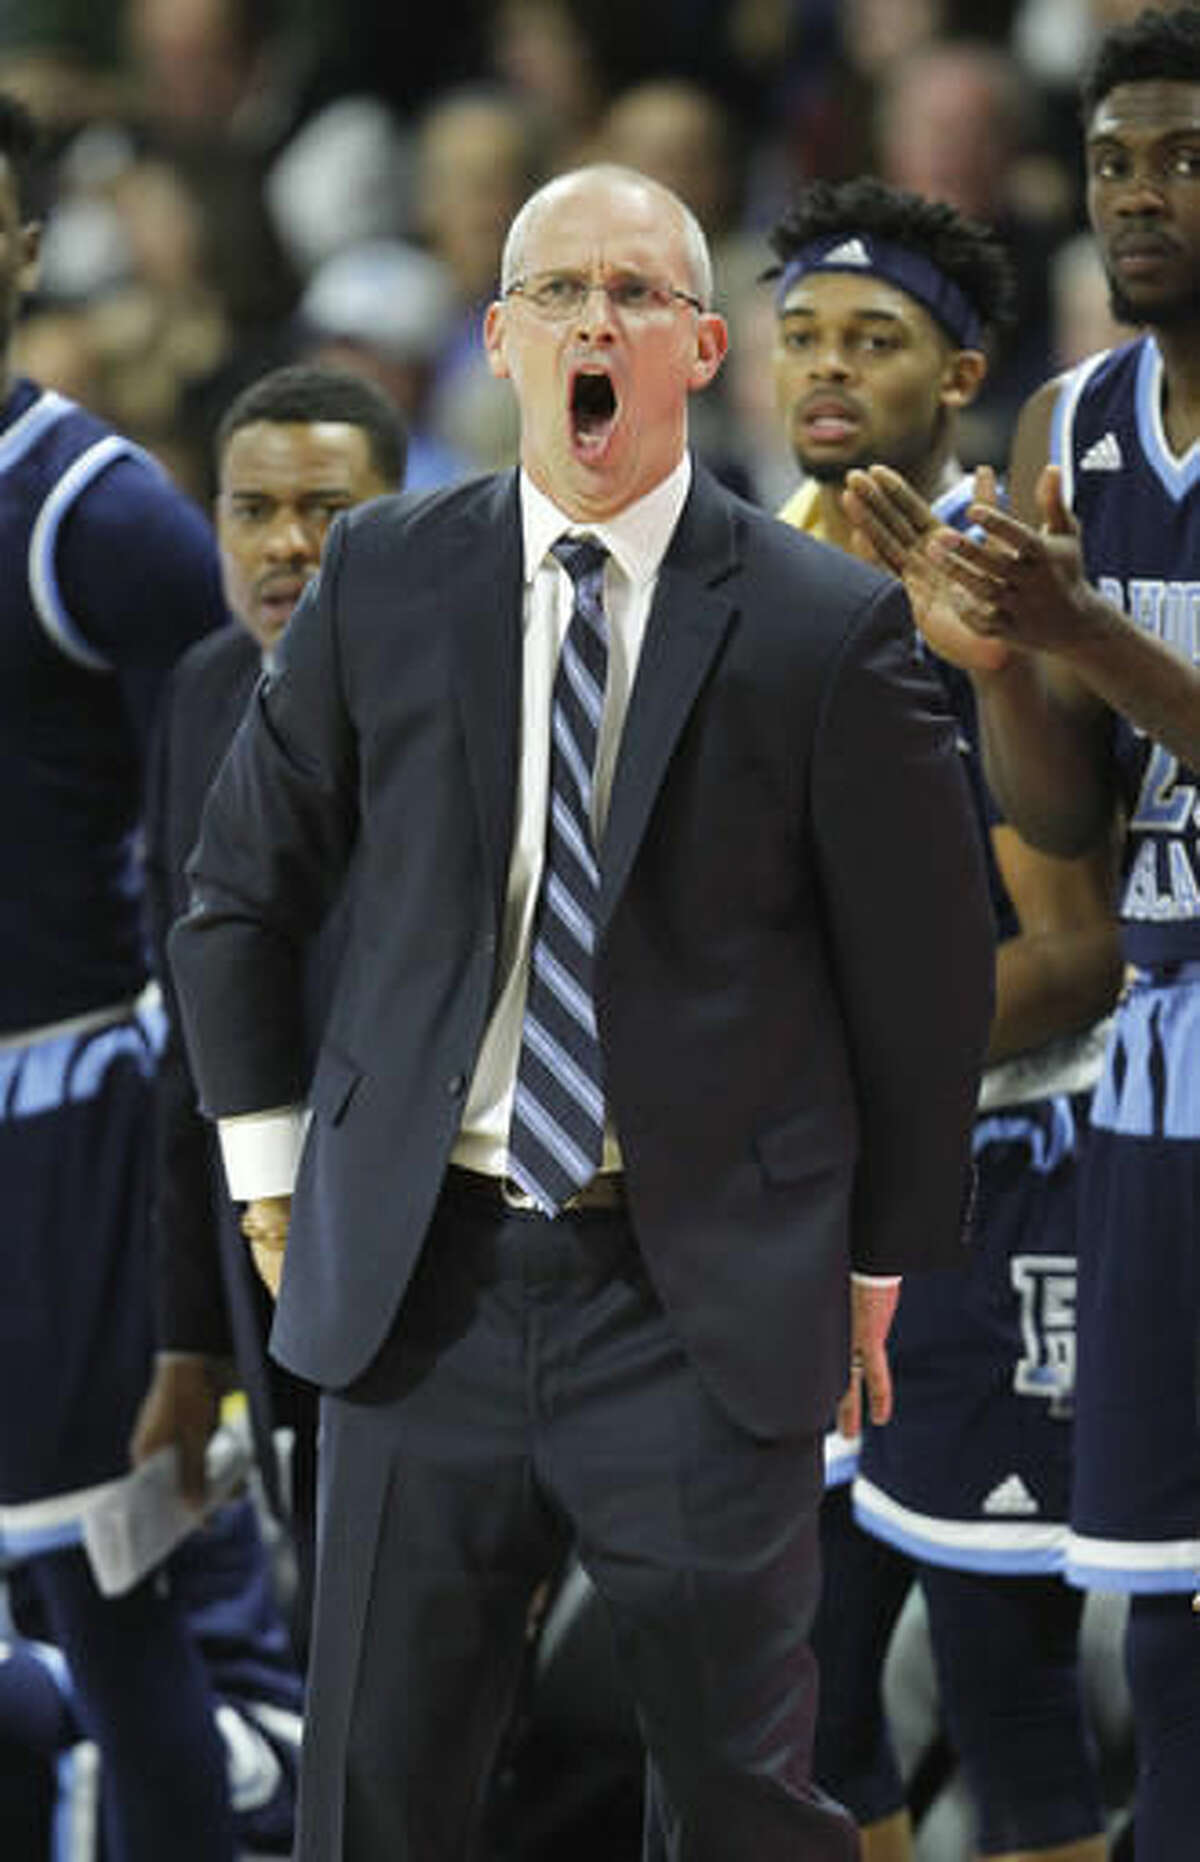 1. Danny Hurley, Rhode Island Hurley has turned around two programs in recent years — Wagner, where he turned a 13-17 team into a 25-6 program in his two seasons, and Rhode Island, where he currently has the Rams perched in the Top 25 and vying for the Atlantic-10 tournament title. Hurley, described as Jim Calhoun-like and notoriously tough on his staff and players, has great Northeast recruiting ties. Sources have told Hearst Media Connecticut he absolutely would be interested in UConn, though others insist he’s looking for a Power 5 job that’s not looking at a long rebuild.